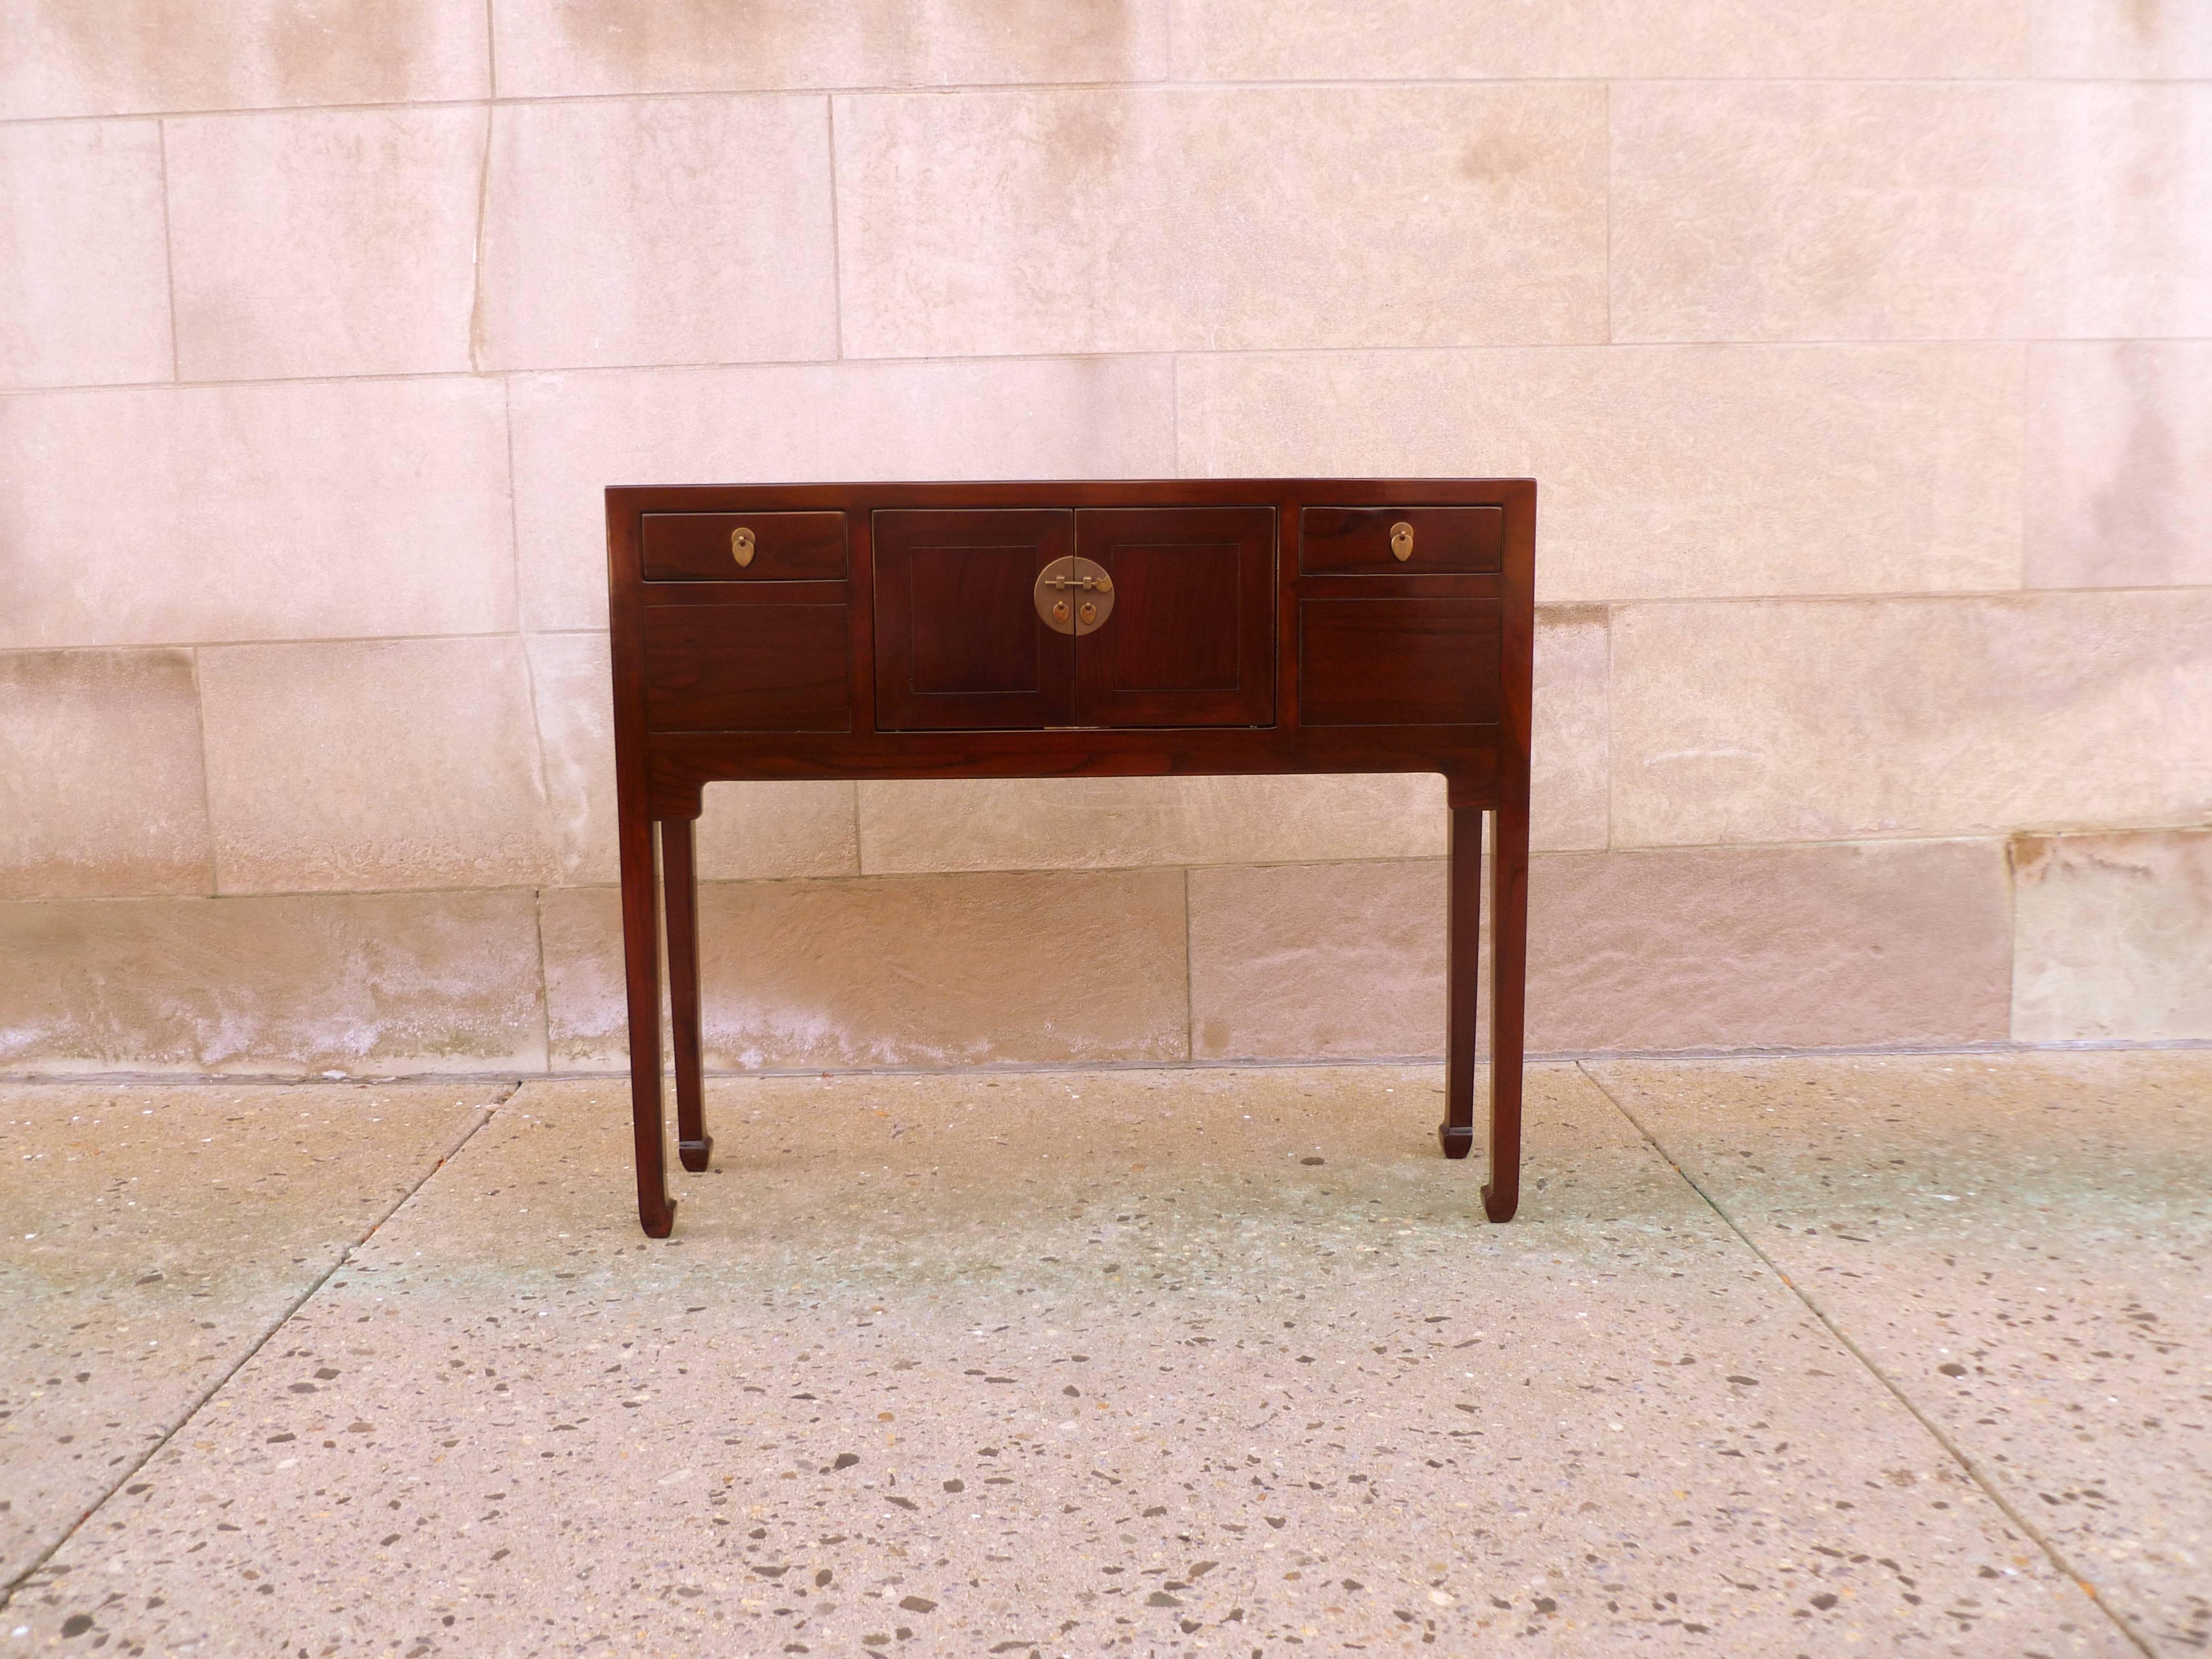 A simple and elegant Jumu table, framed top supported by slender legs and joined by two drawers and a pair of doors, brass fitting, beautiful color and form.